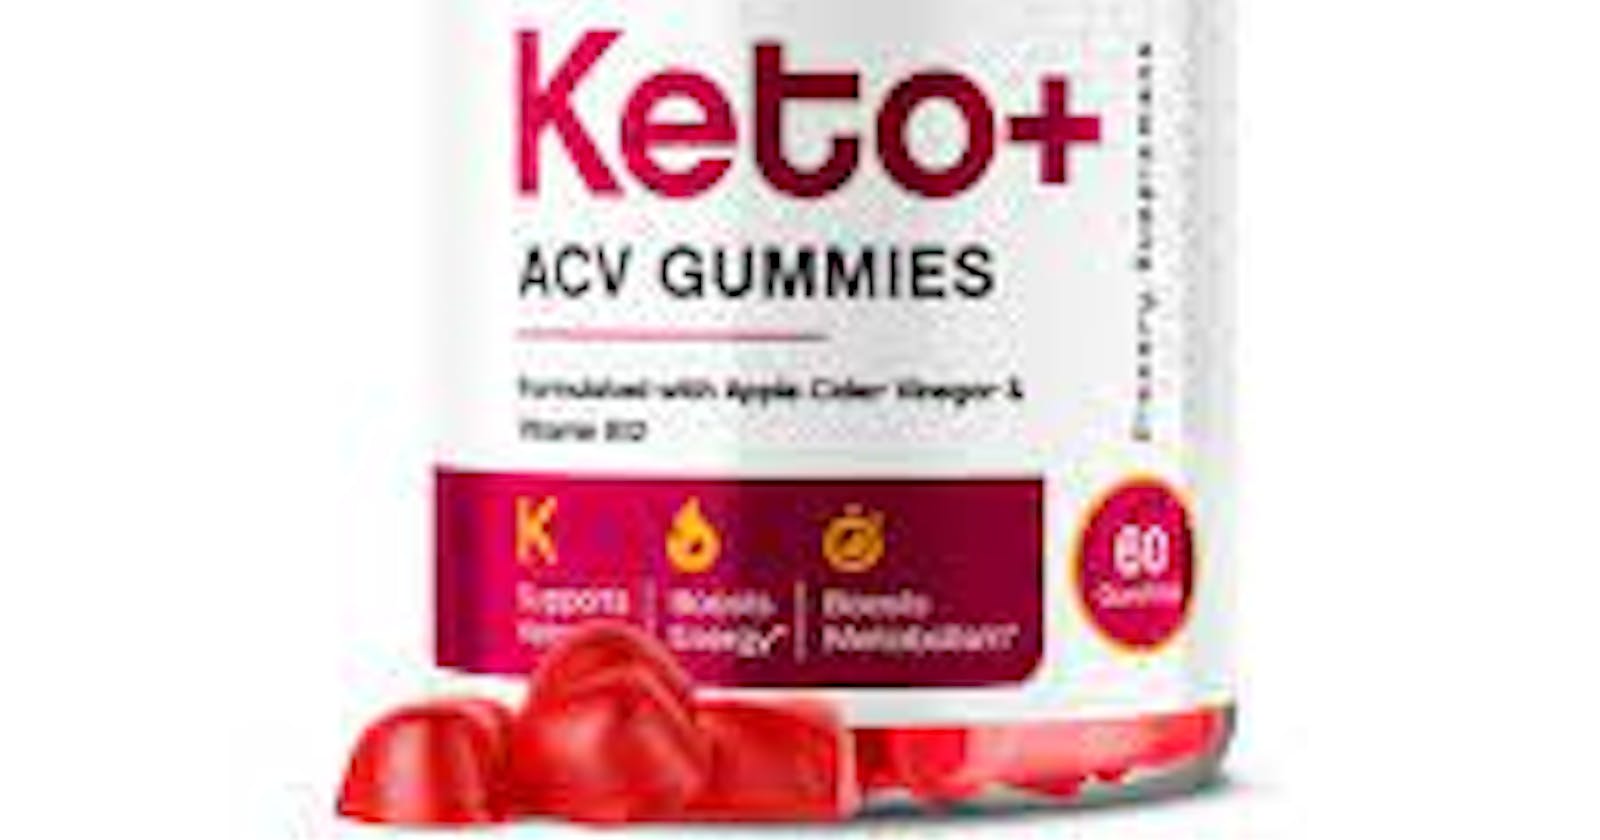 x10 boost keto acv gummies Review - Scam Brand or Safe TruBio Keto Weight Loss Gummy?